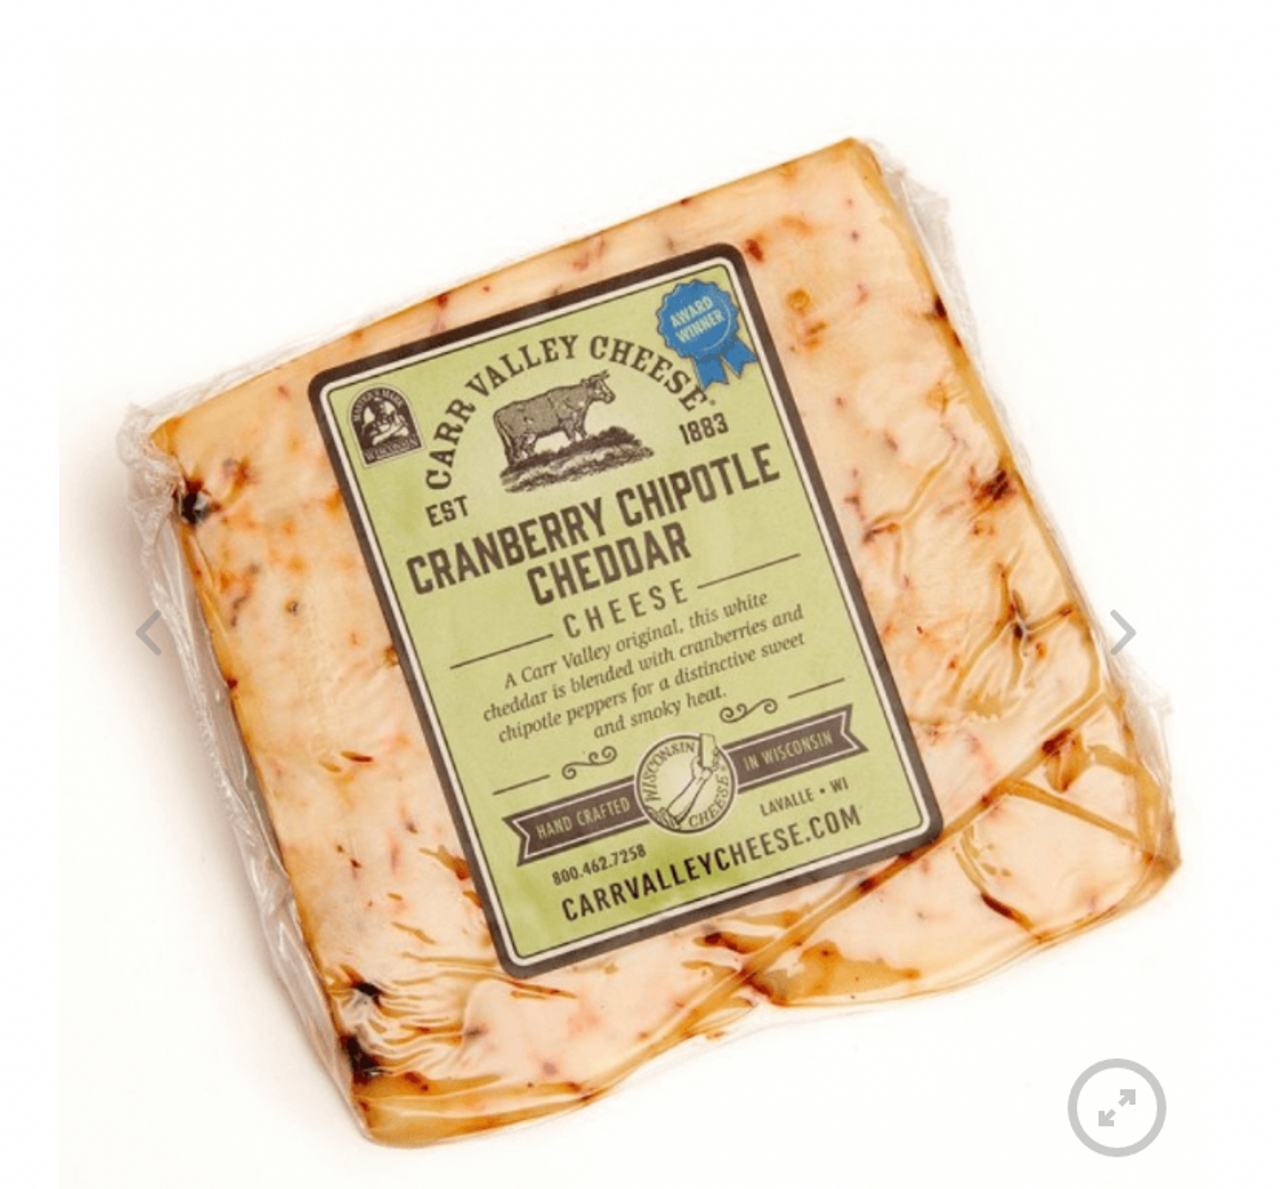 Cranberry Chipotle Cheddar